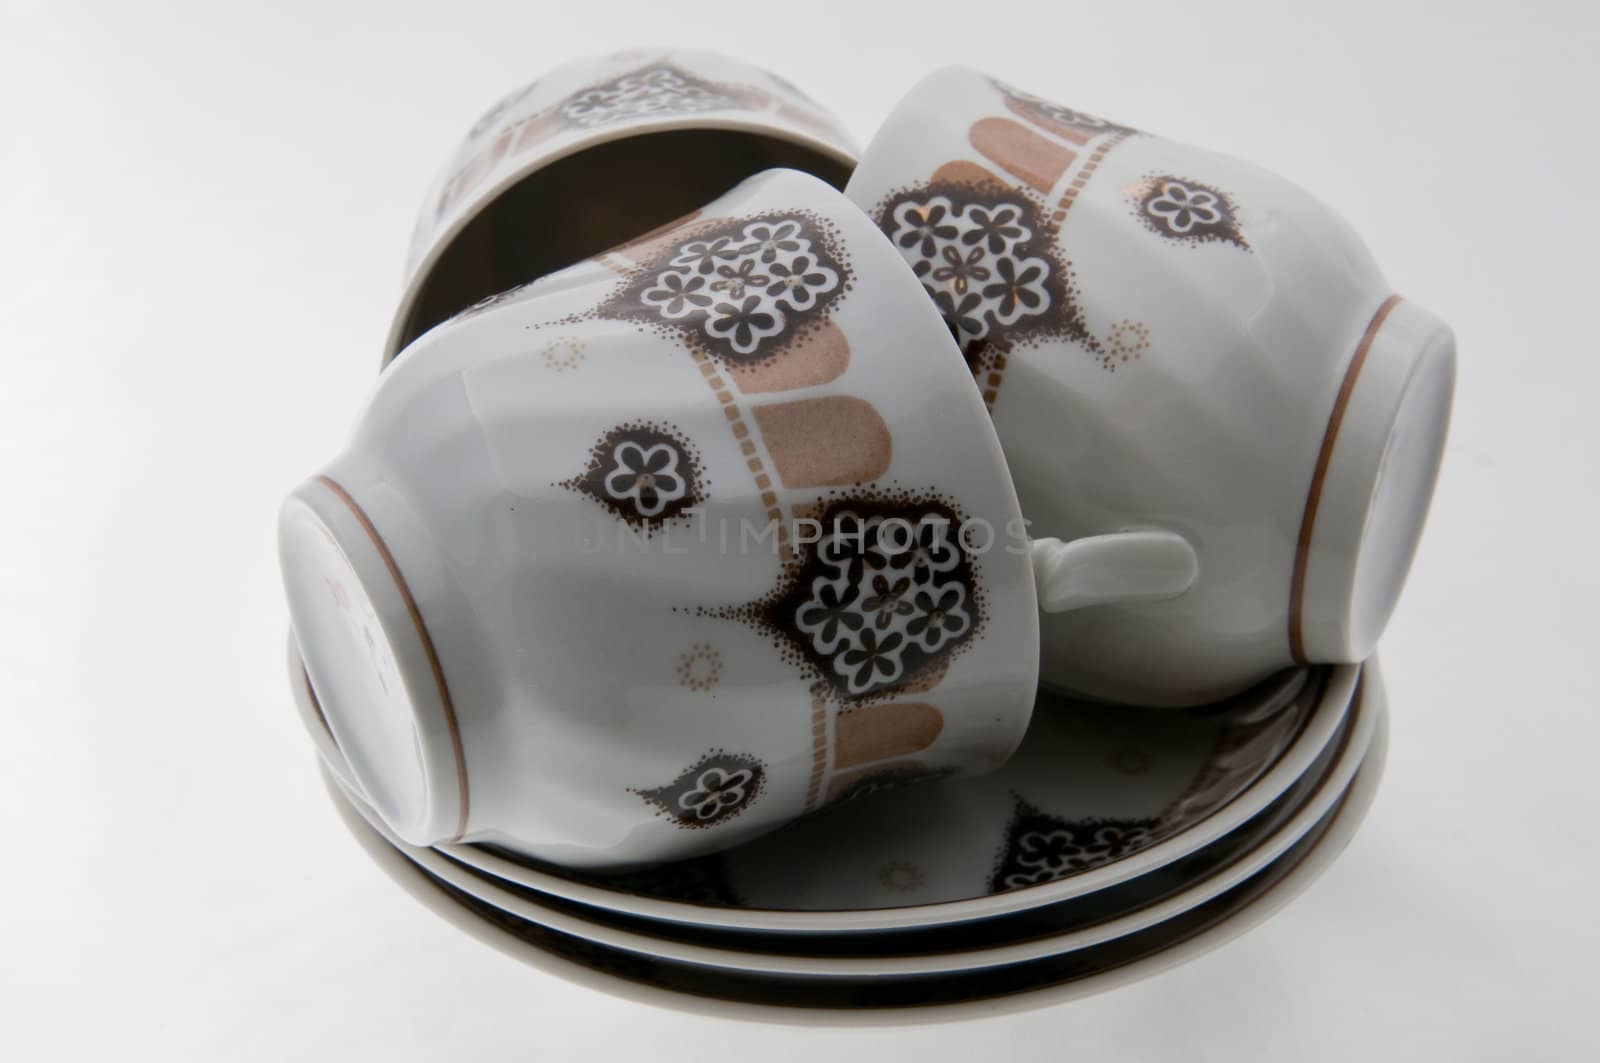 the picture of the white tea set